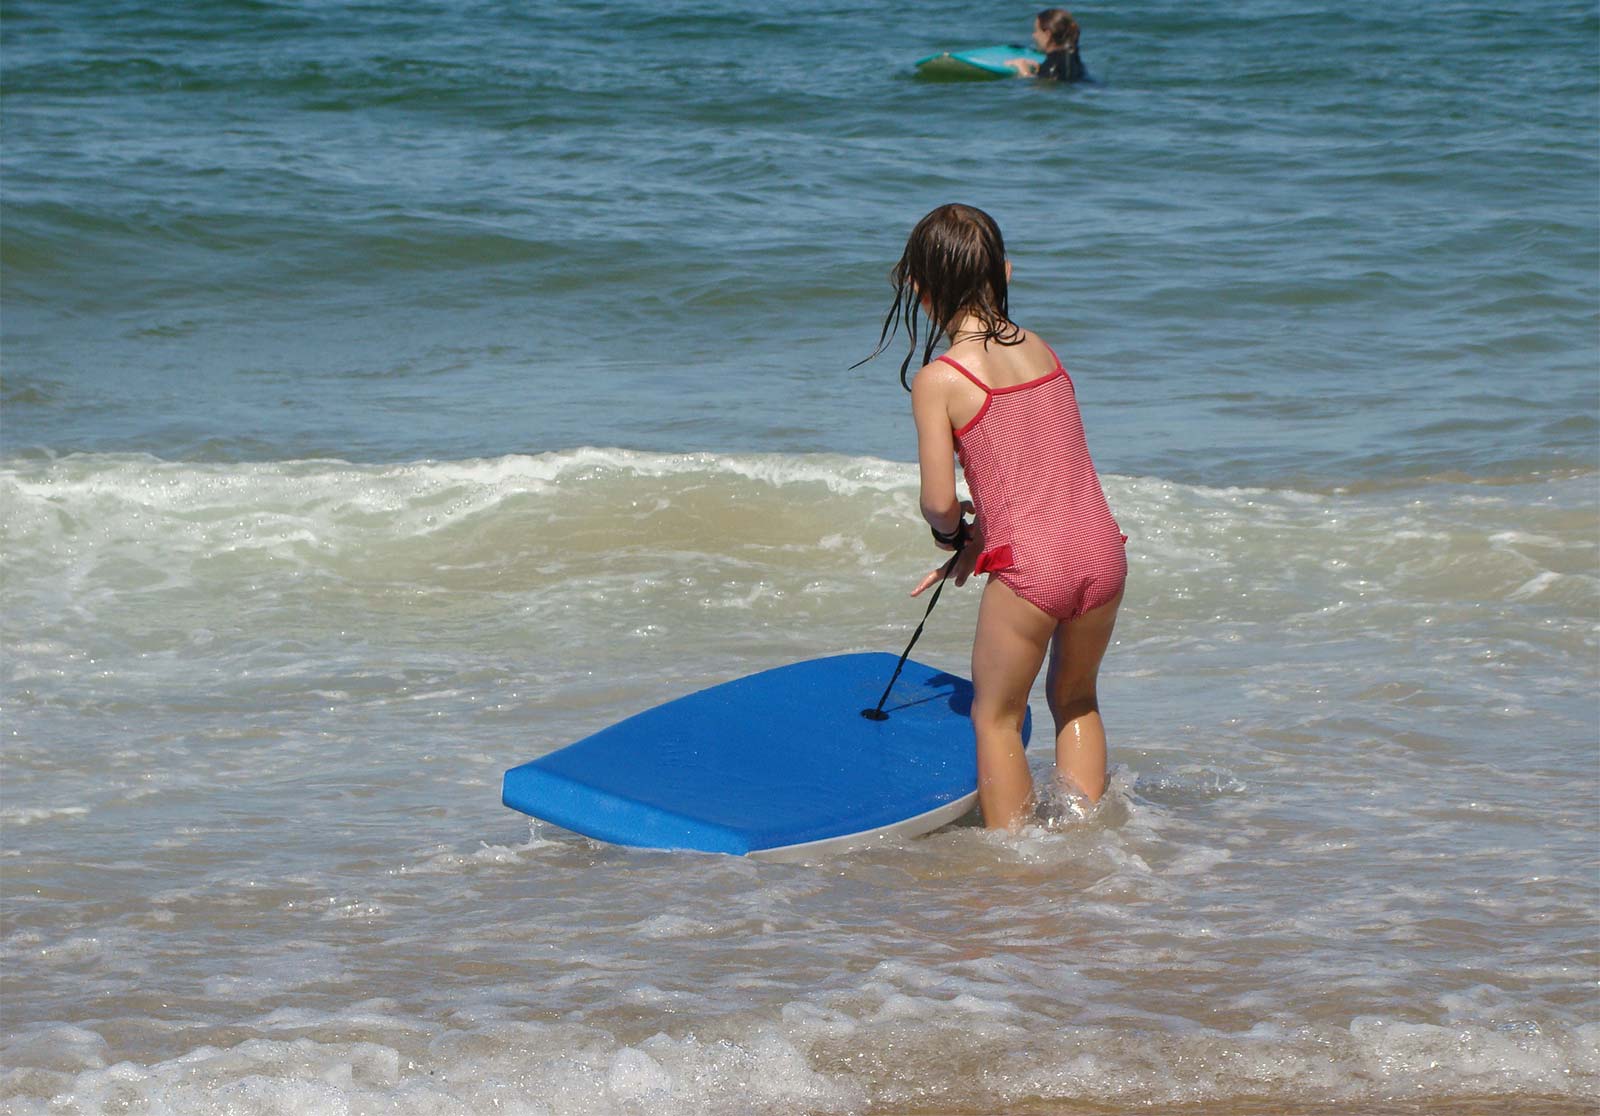 A little girl at the water's edge with a bodyboard